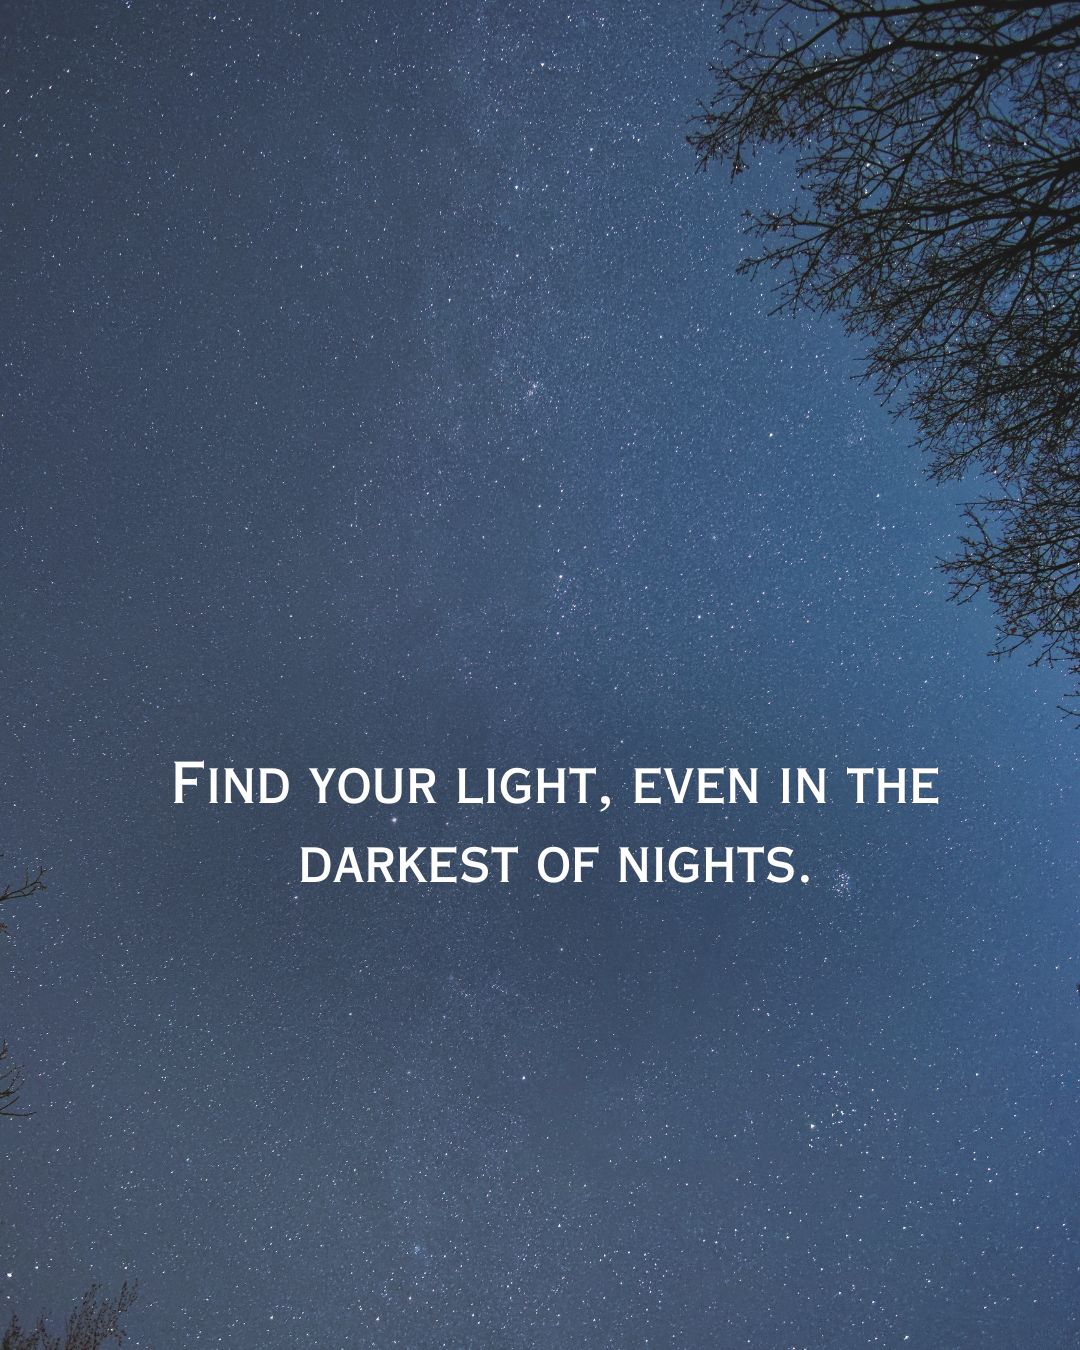 Short Night Sky Quotes for Instagram Image 10